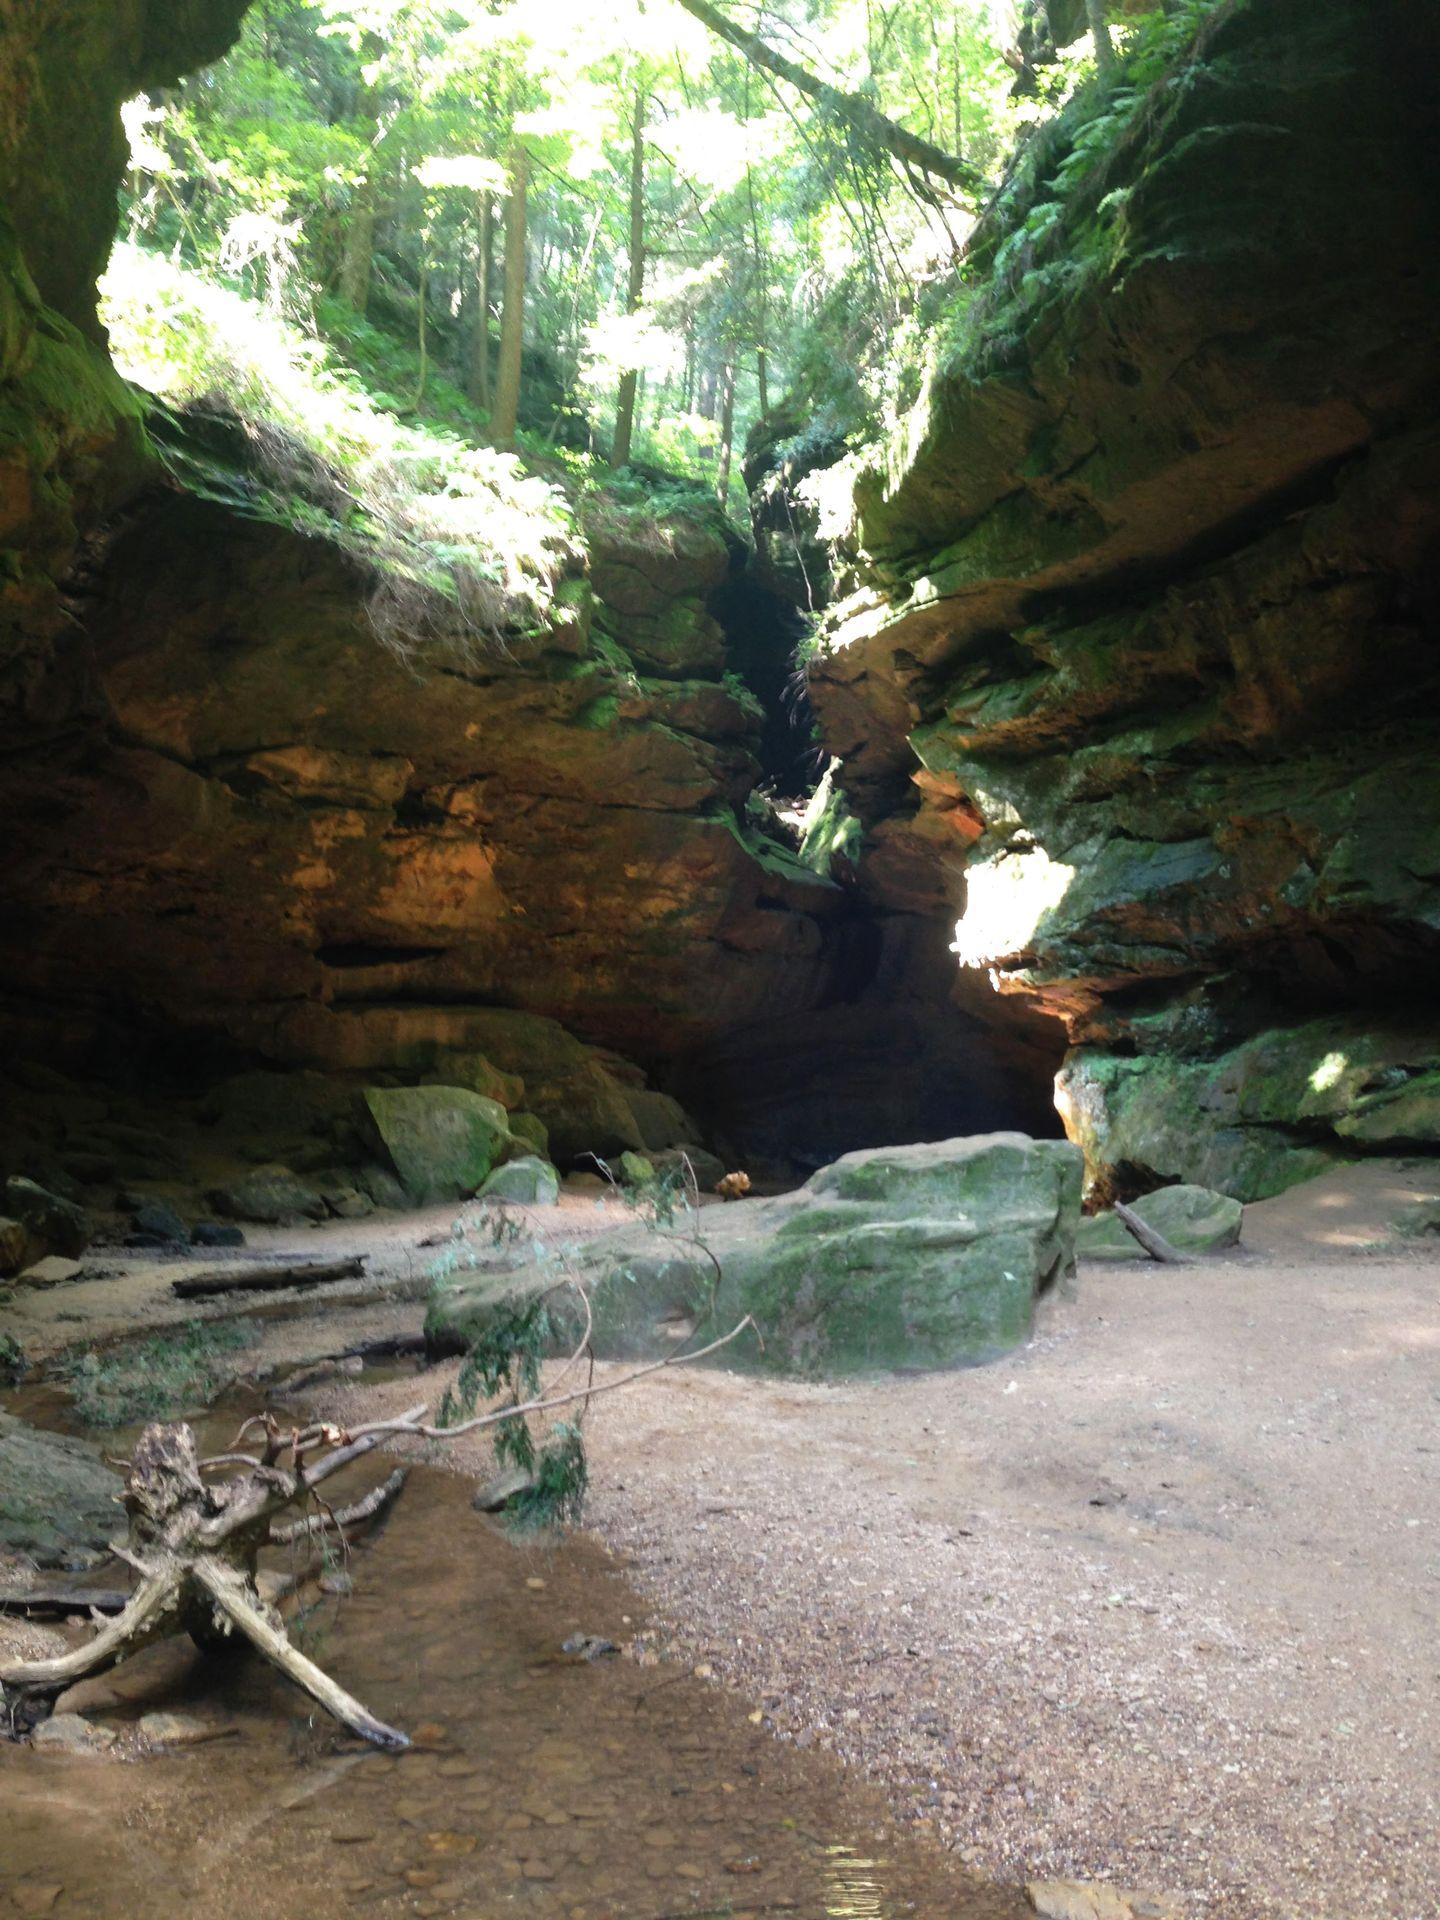 Looking back into the grotto area of Conkle's Hollow in Hocking Hills